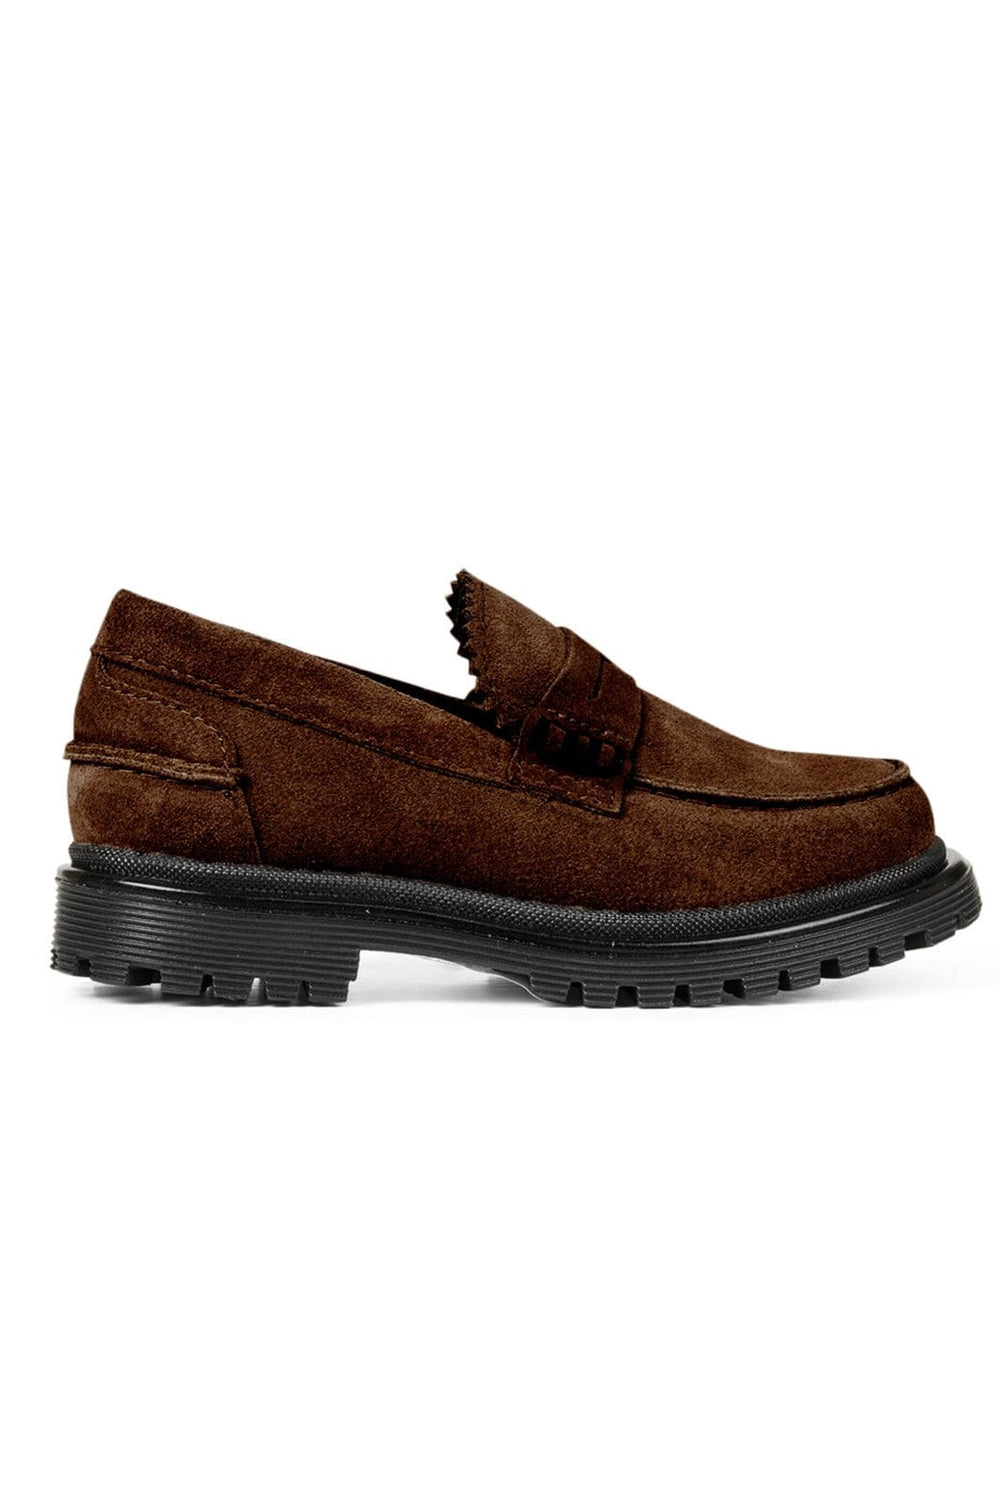 Angulus - Loafer - 1753 Loafers 